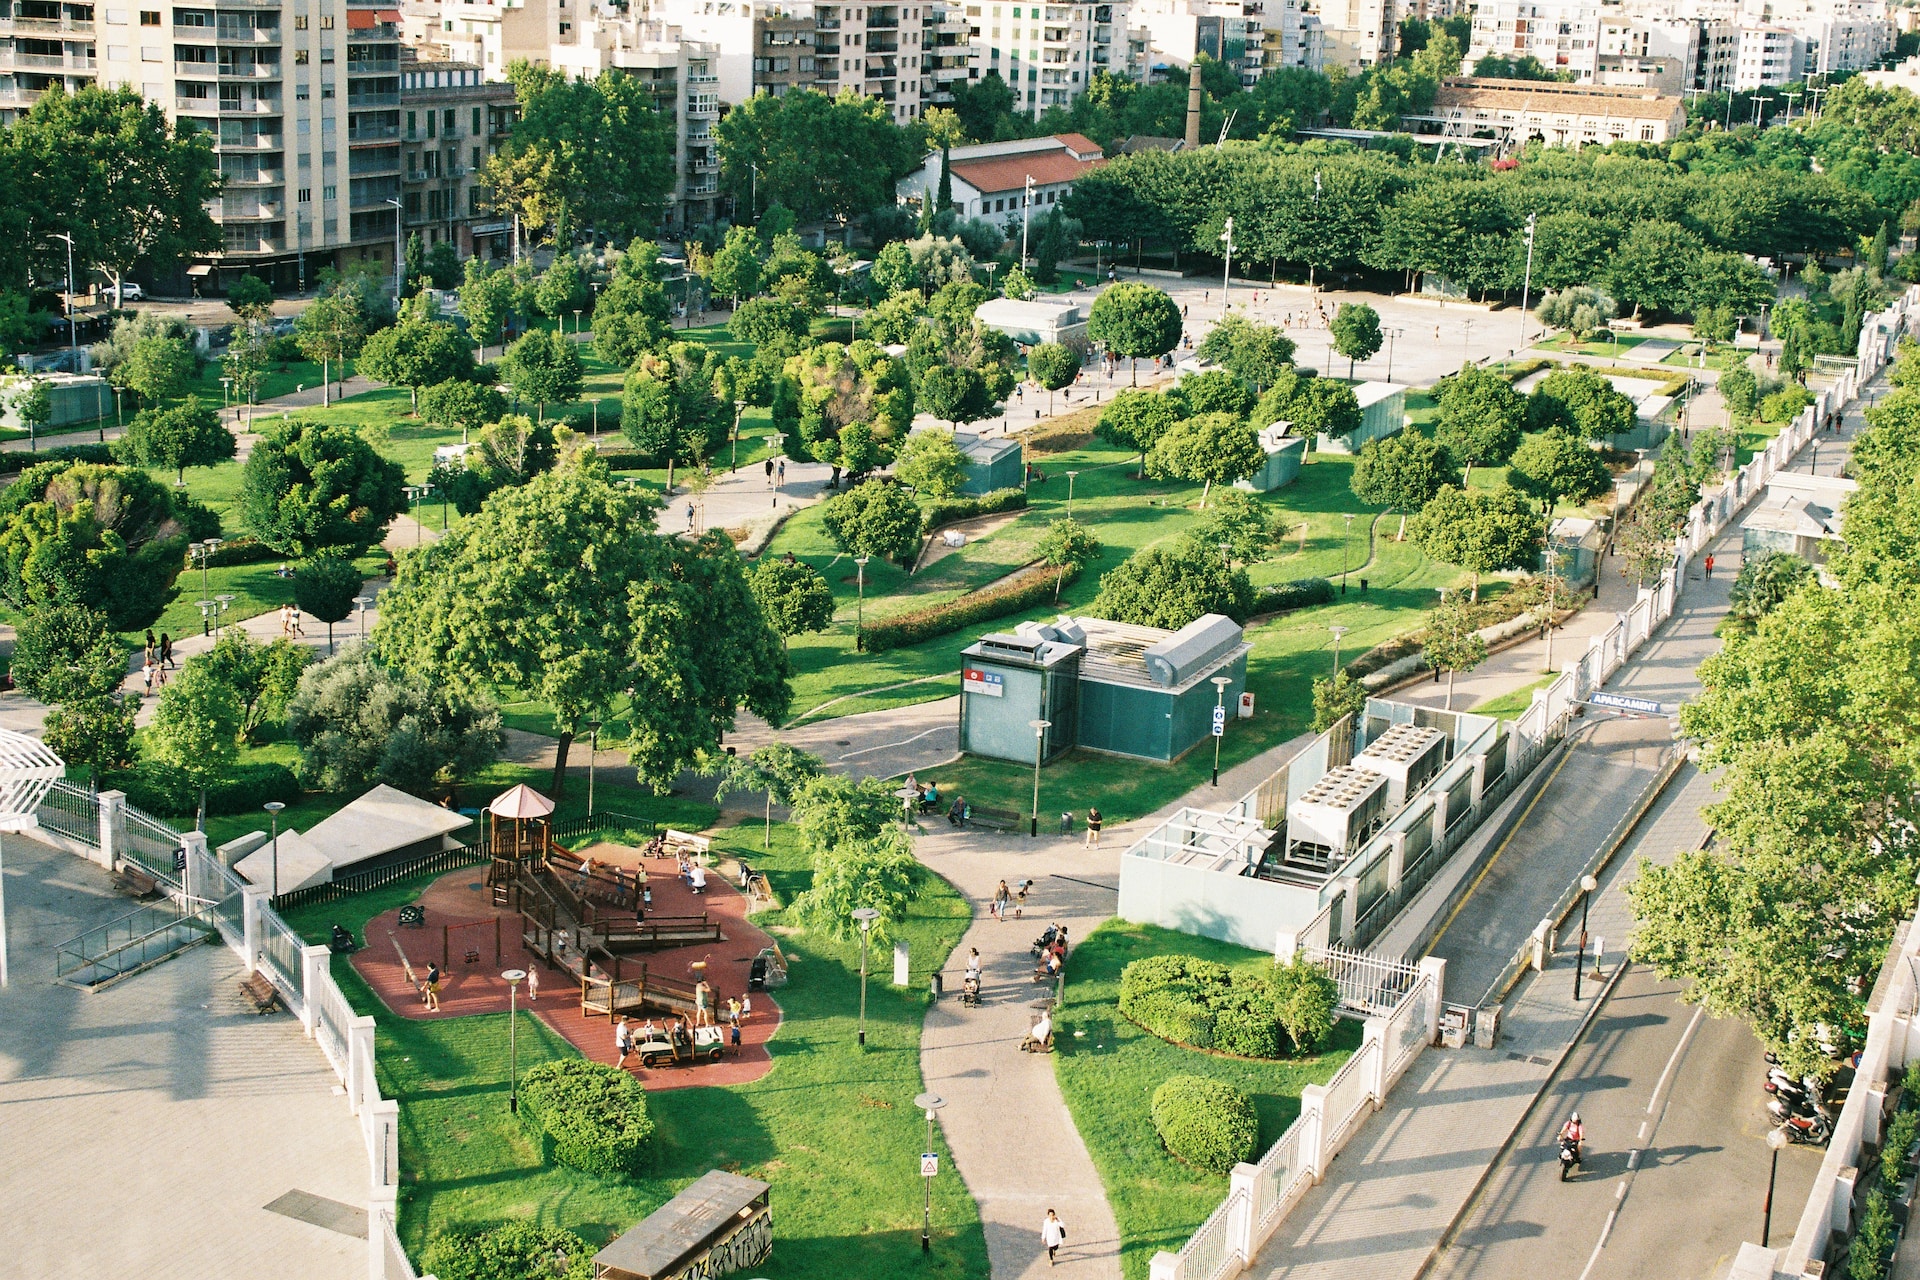 sustainable city planning